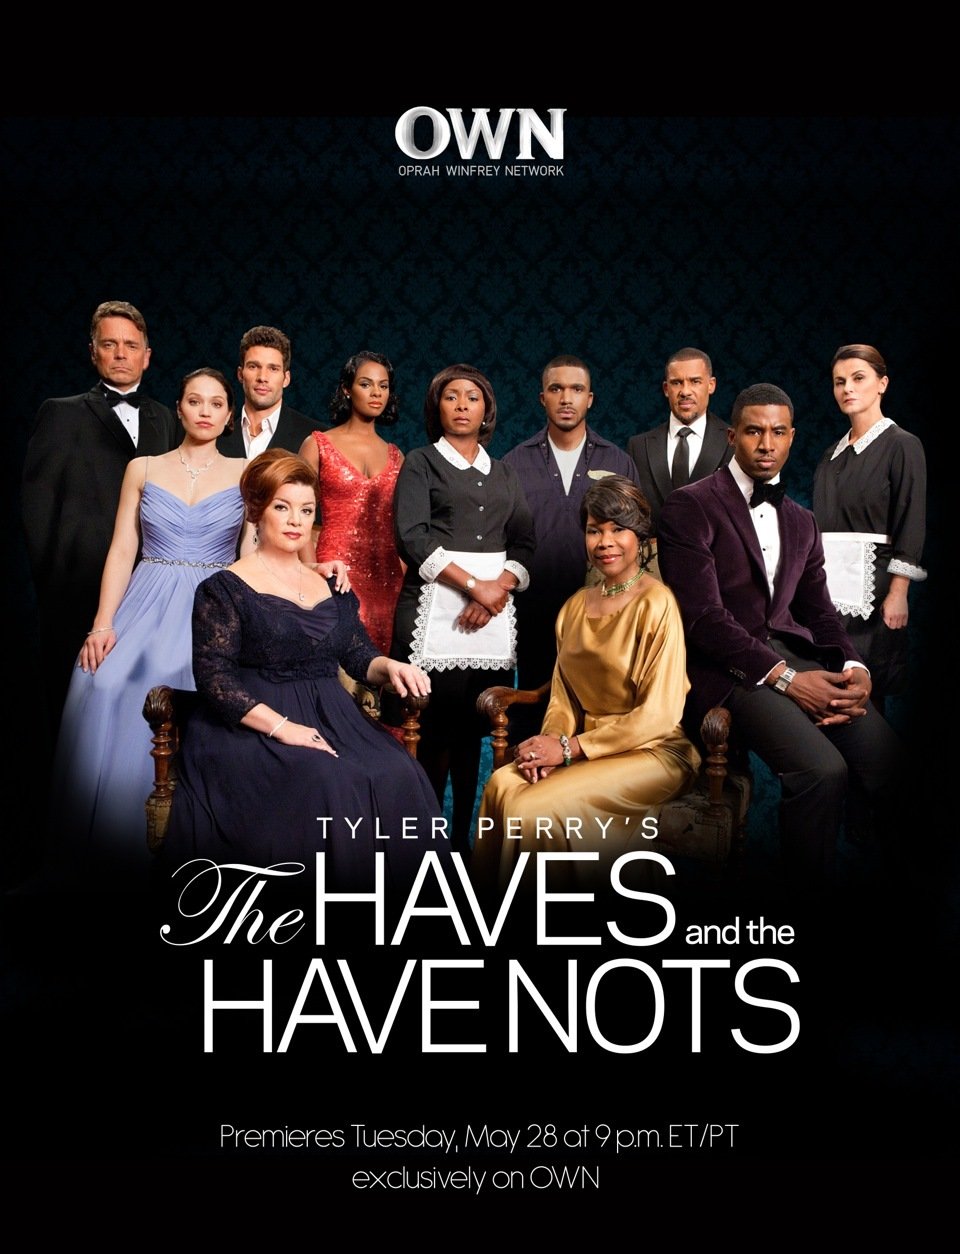 Eva Tamargo, Crystal R. Fox, Peter Parros, John Schneider, Gavin Houston, Angela Robinson, Renee Lawless, Tika Sumpter, Aaron O'Connell, Tyler Lepley and Jaclyn Betham in The Haves and the Have Nots (2013)